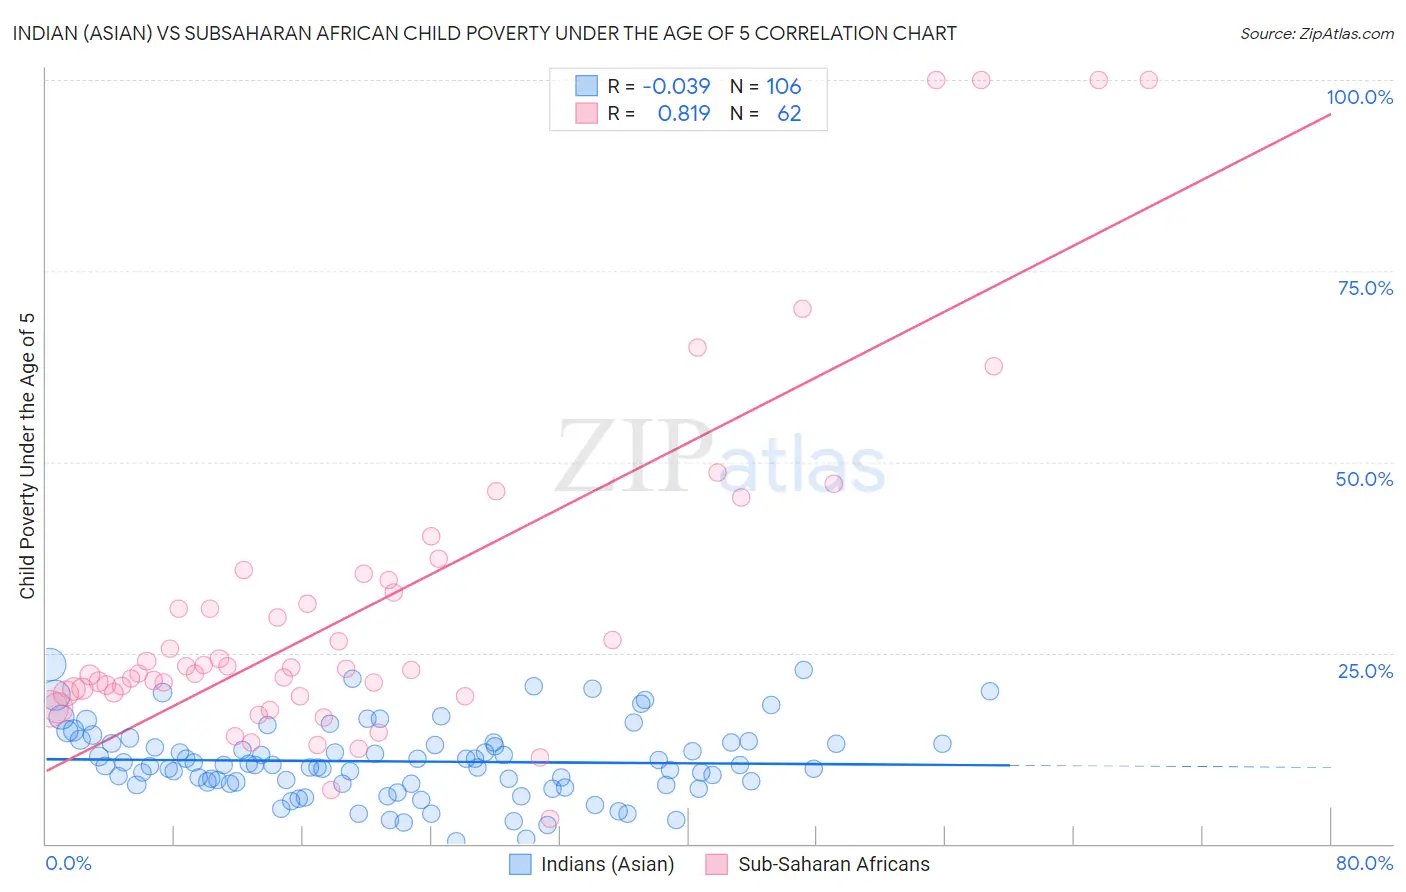 Indian (Asian) vs Subsaharan African Child Poverty Under the Age of 5